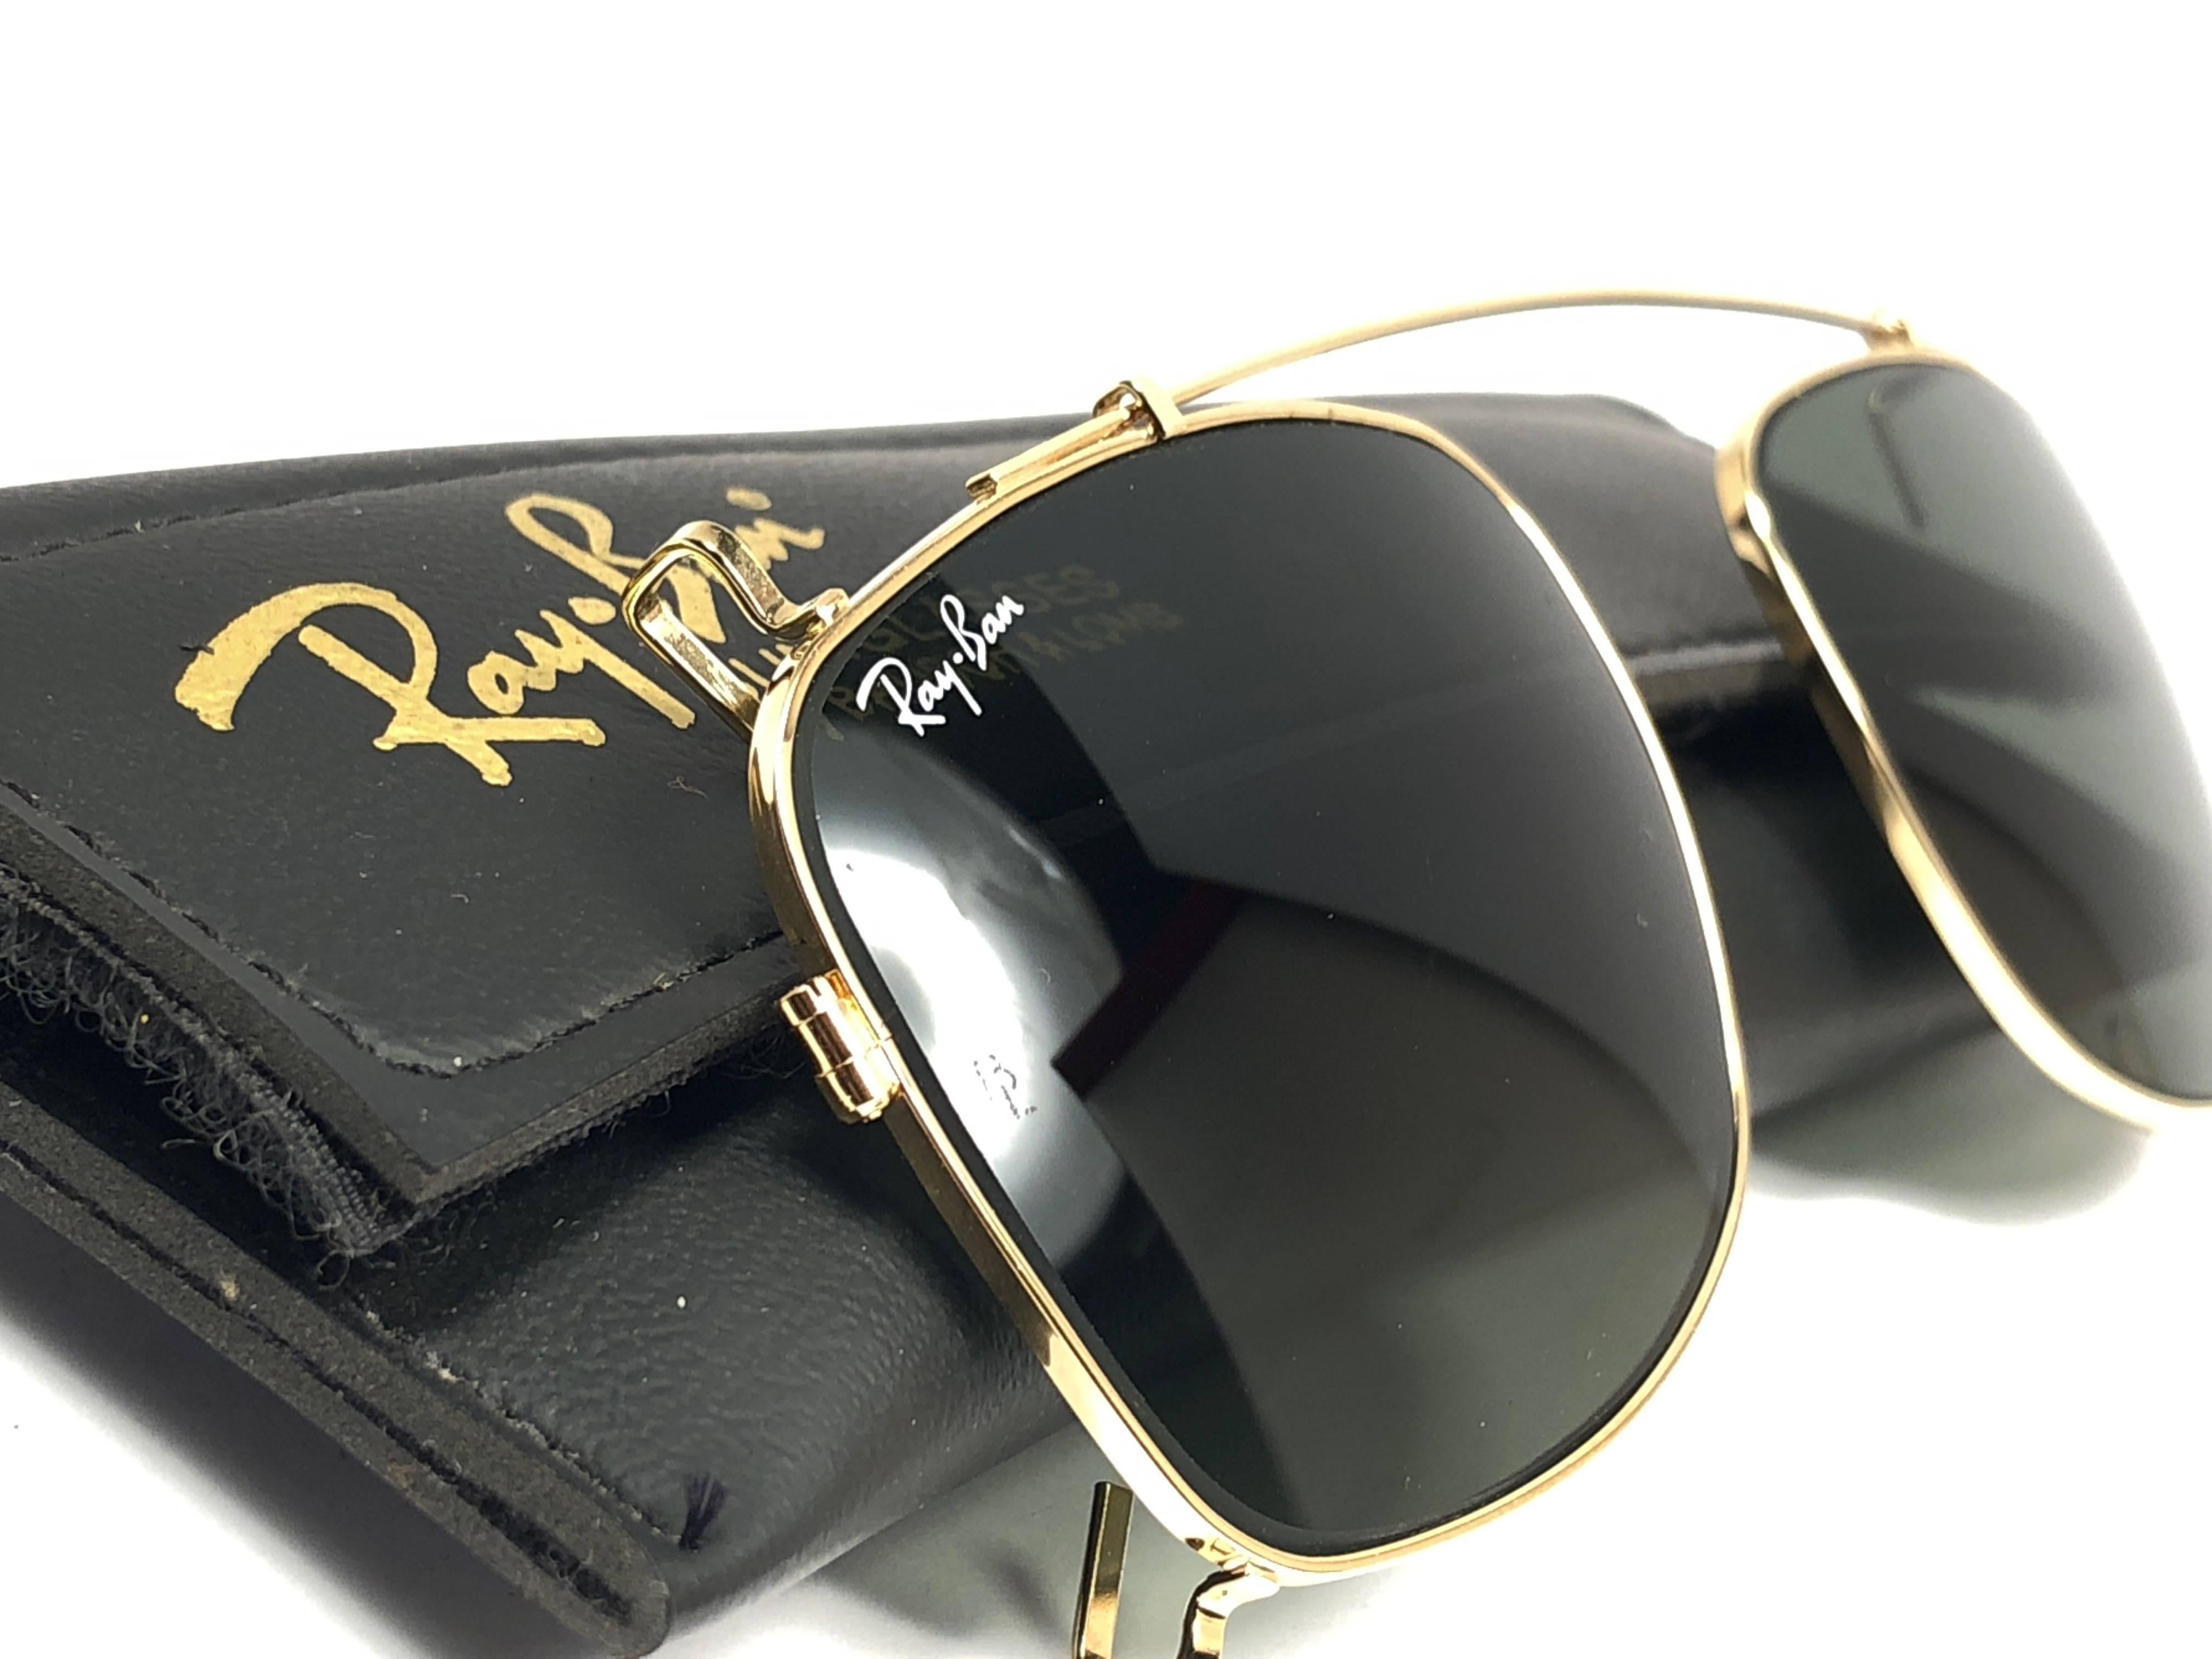 Rare Ray Ban B&L Wayfarer Clip on.

Made in USA.

Comes with its original Ray Ban B&L case.

Thi item may show minor sign of wear due to storage.

